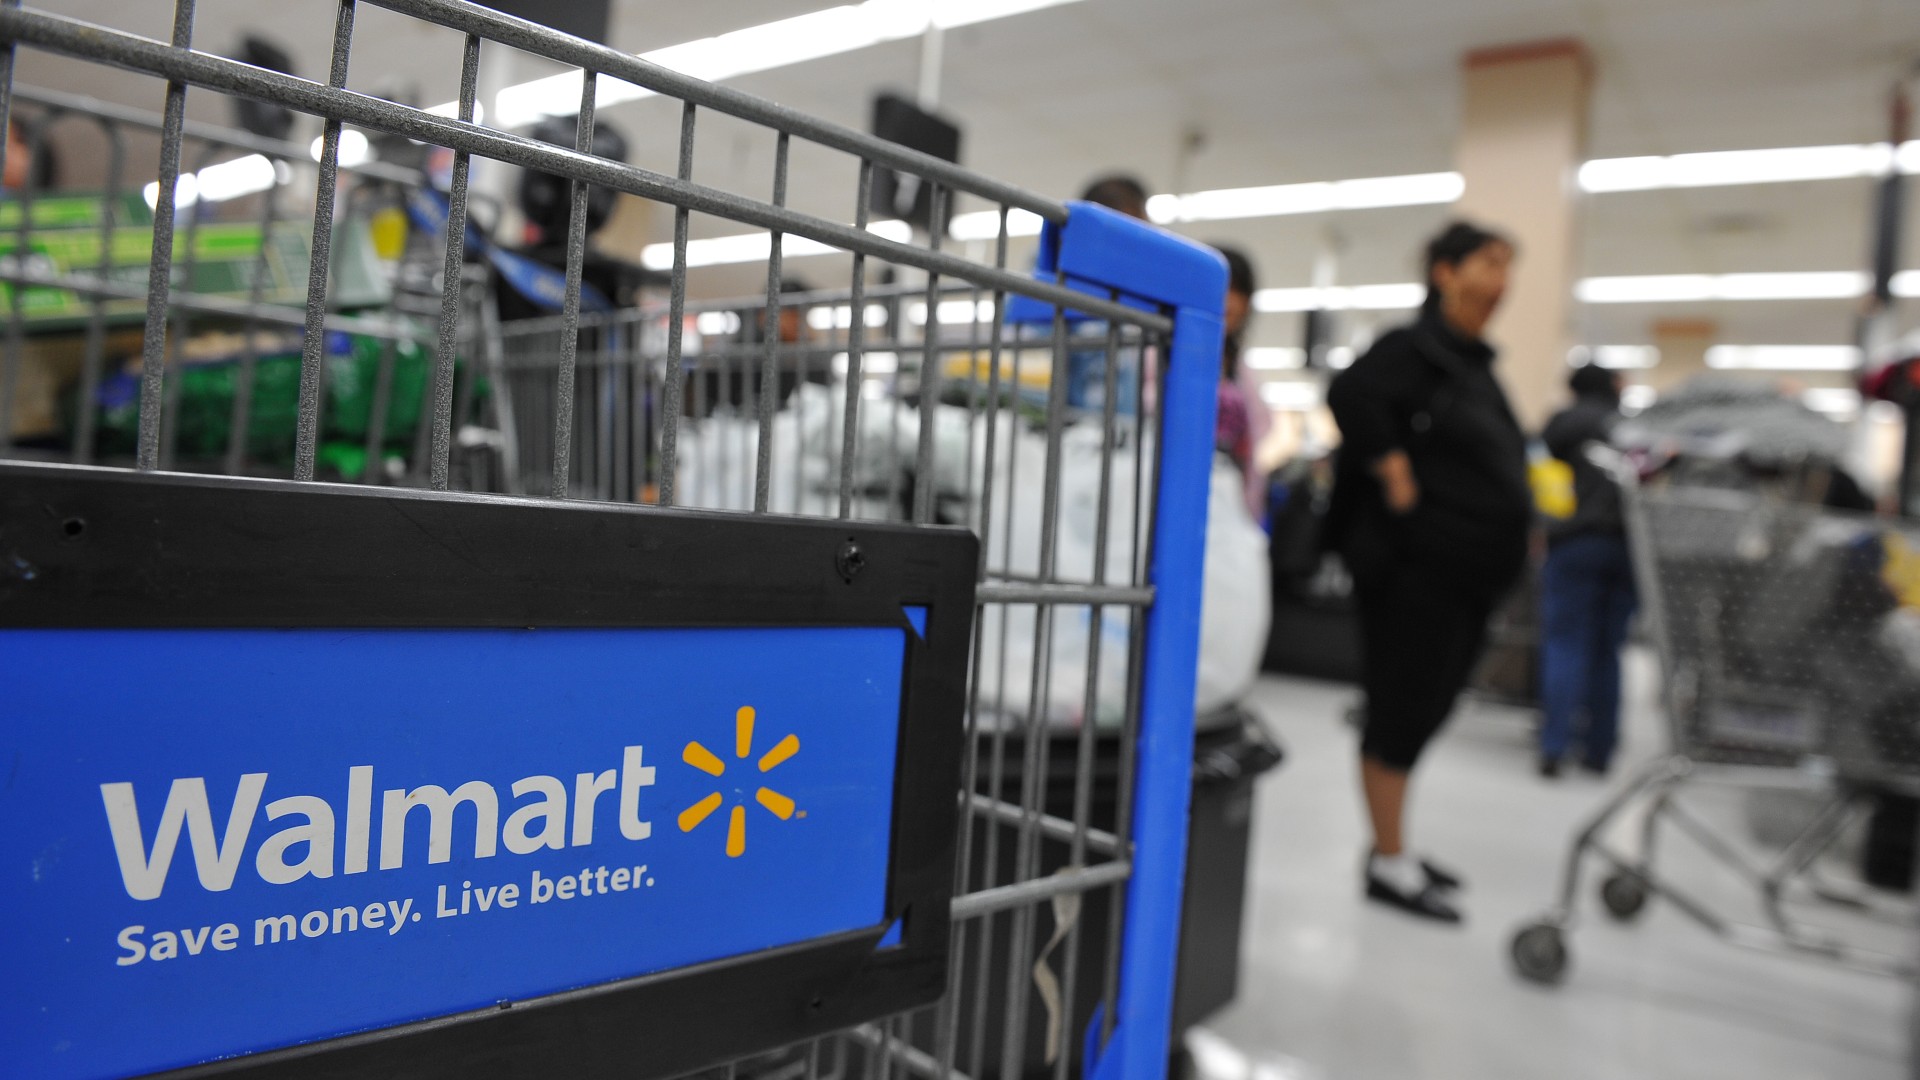 Walmart Faces Lawsuit Demanding Lifetime Of Free Shopping Or $100M By Texas Man Over Civil Rights Violation